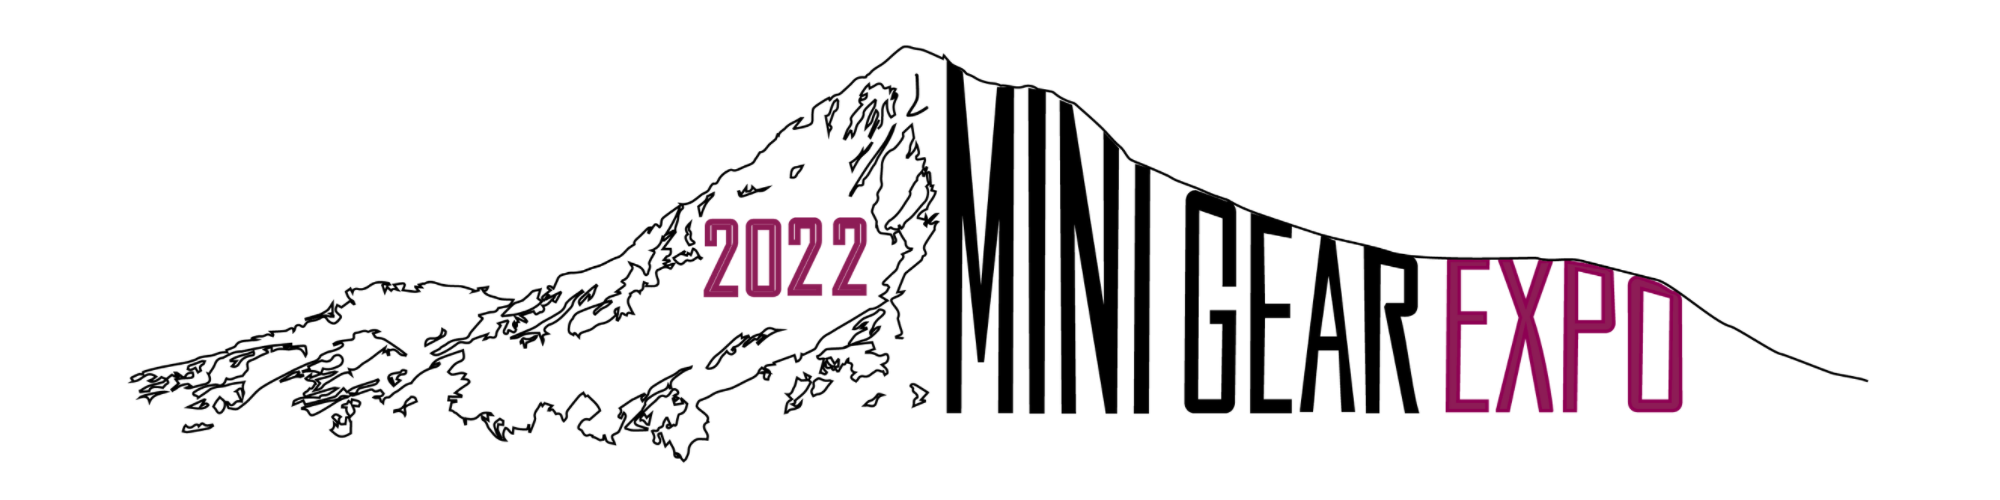 The Mini Gear Expo logo is a black outline of a PNW-inspired mountain with "2022 Mini Gear Expo" written inside the shape.